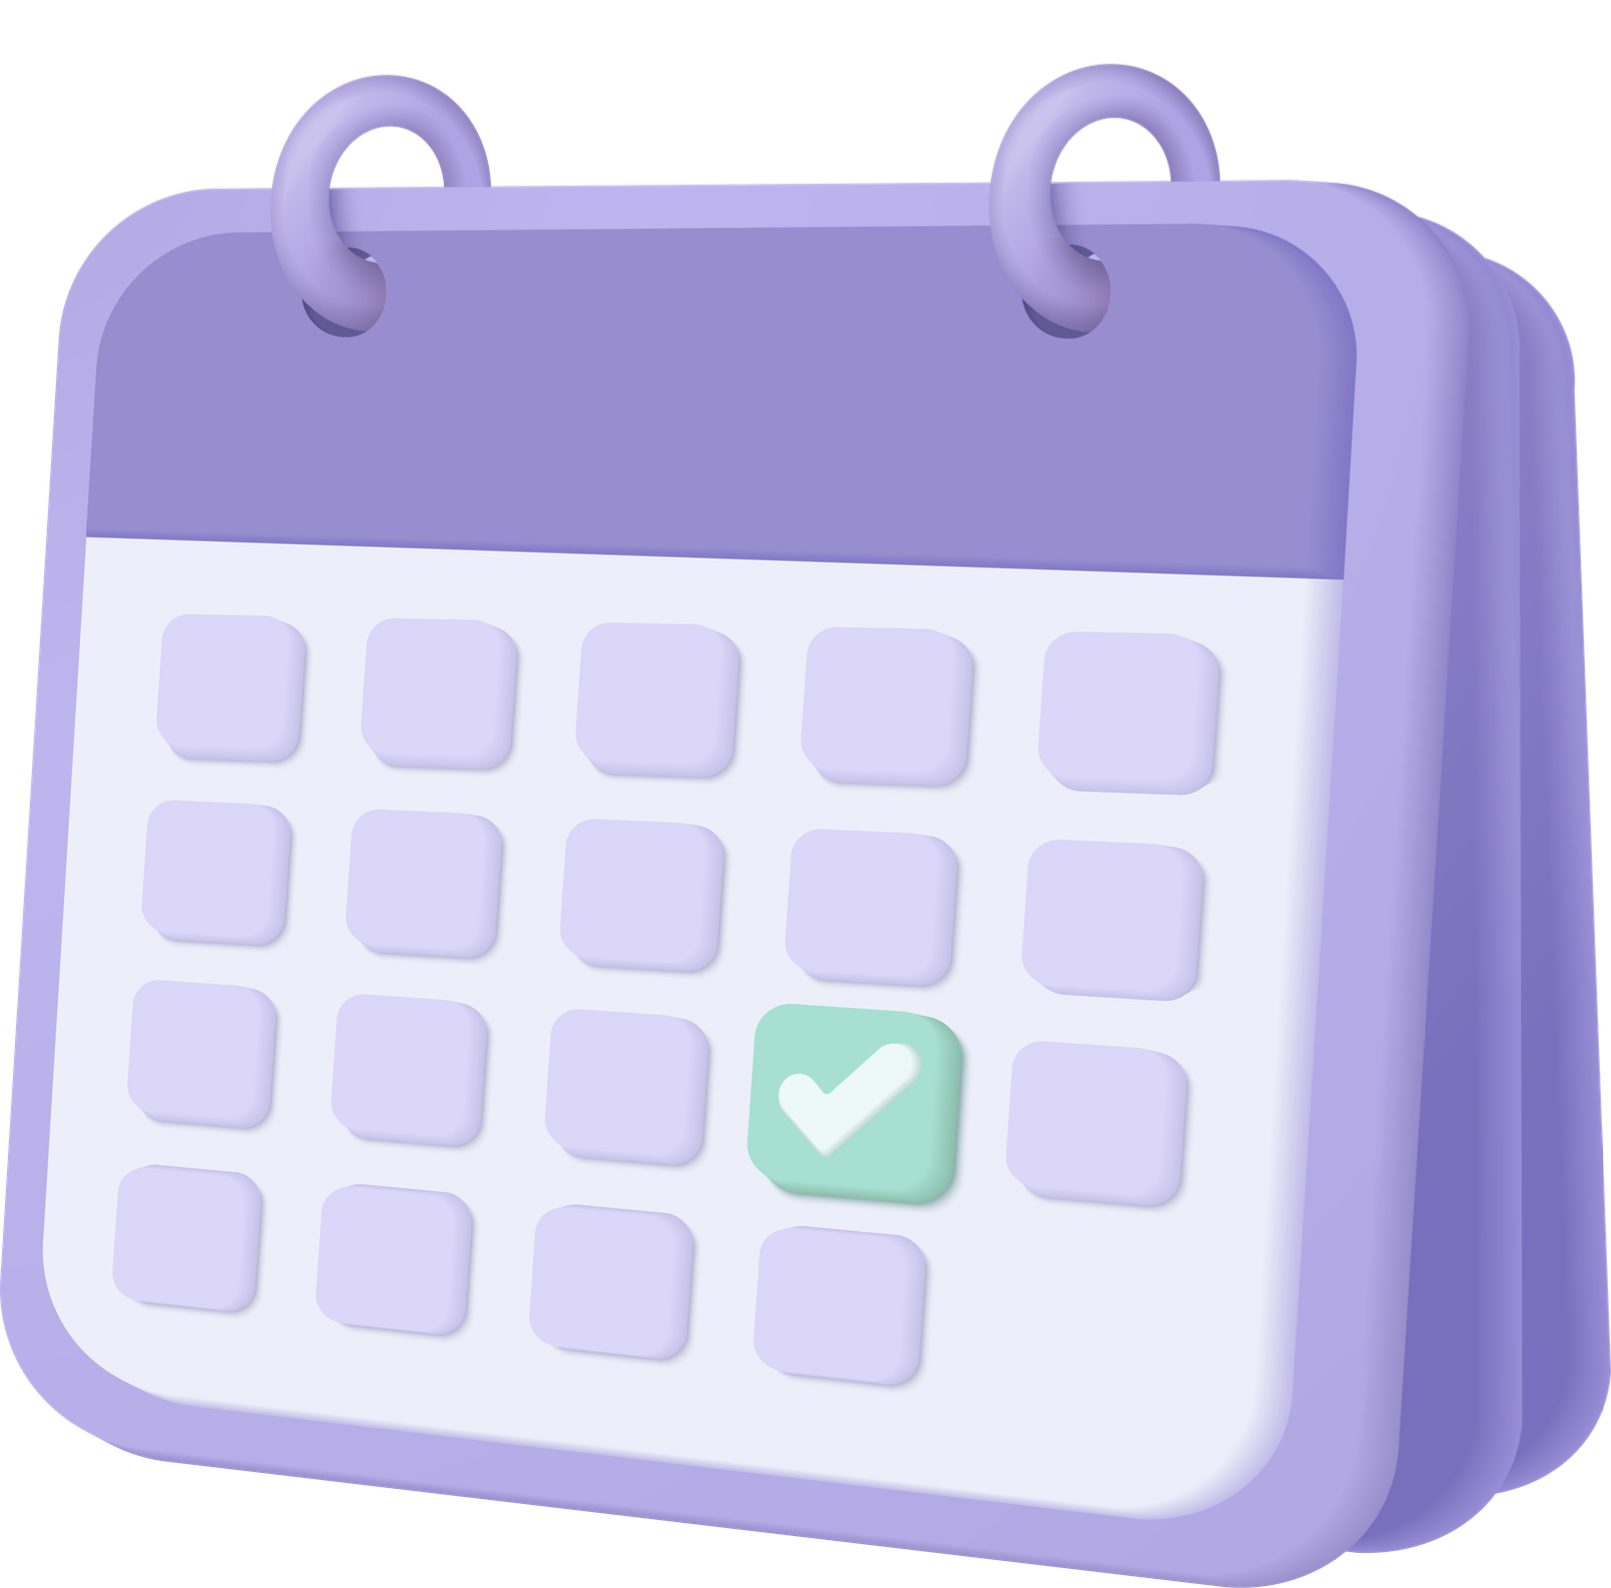 Vecteezy 3d calendar marked date and time for reminder day in purple 17217991